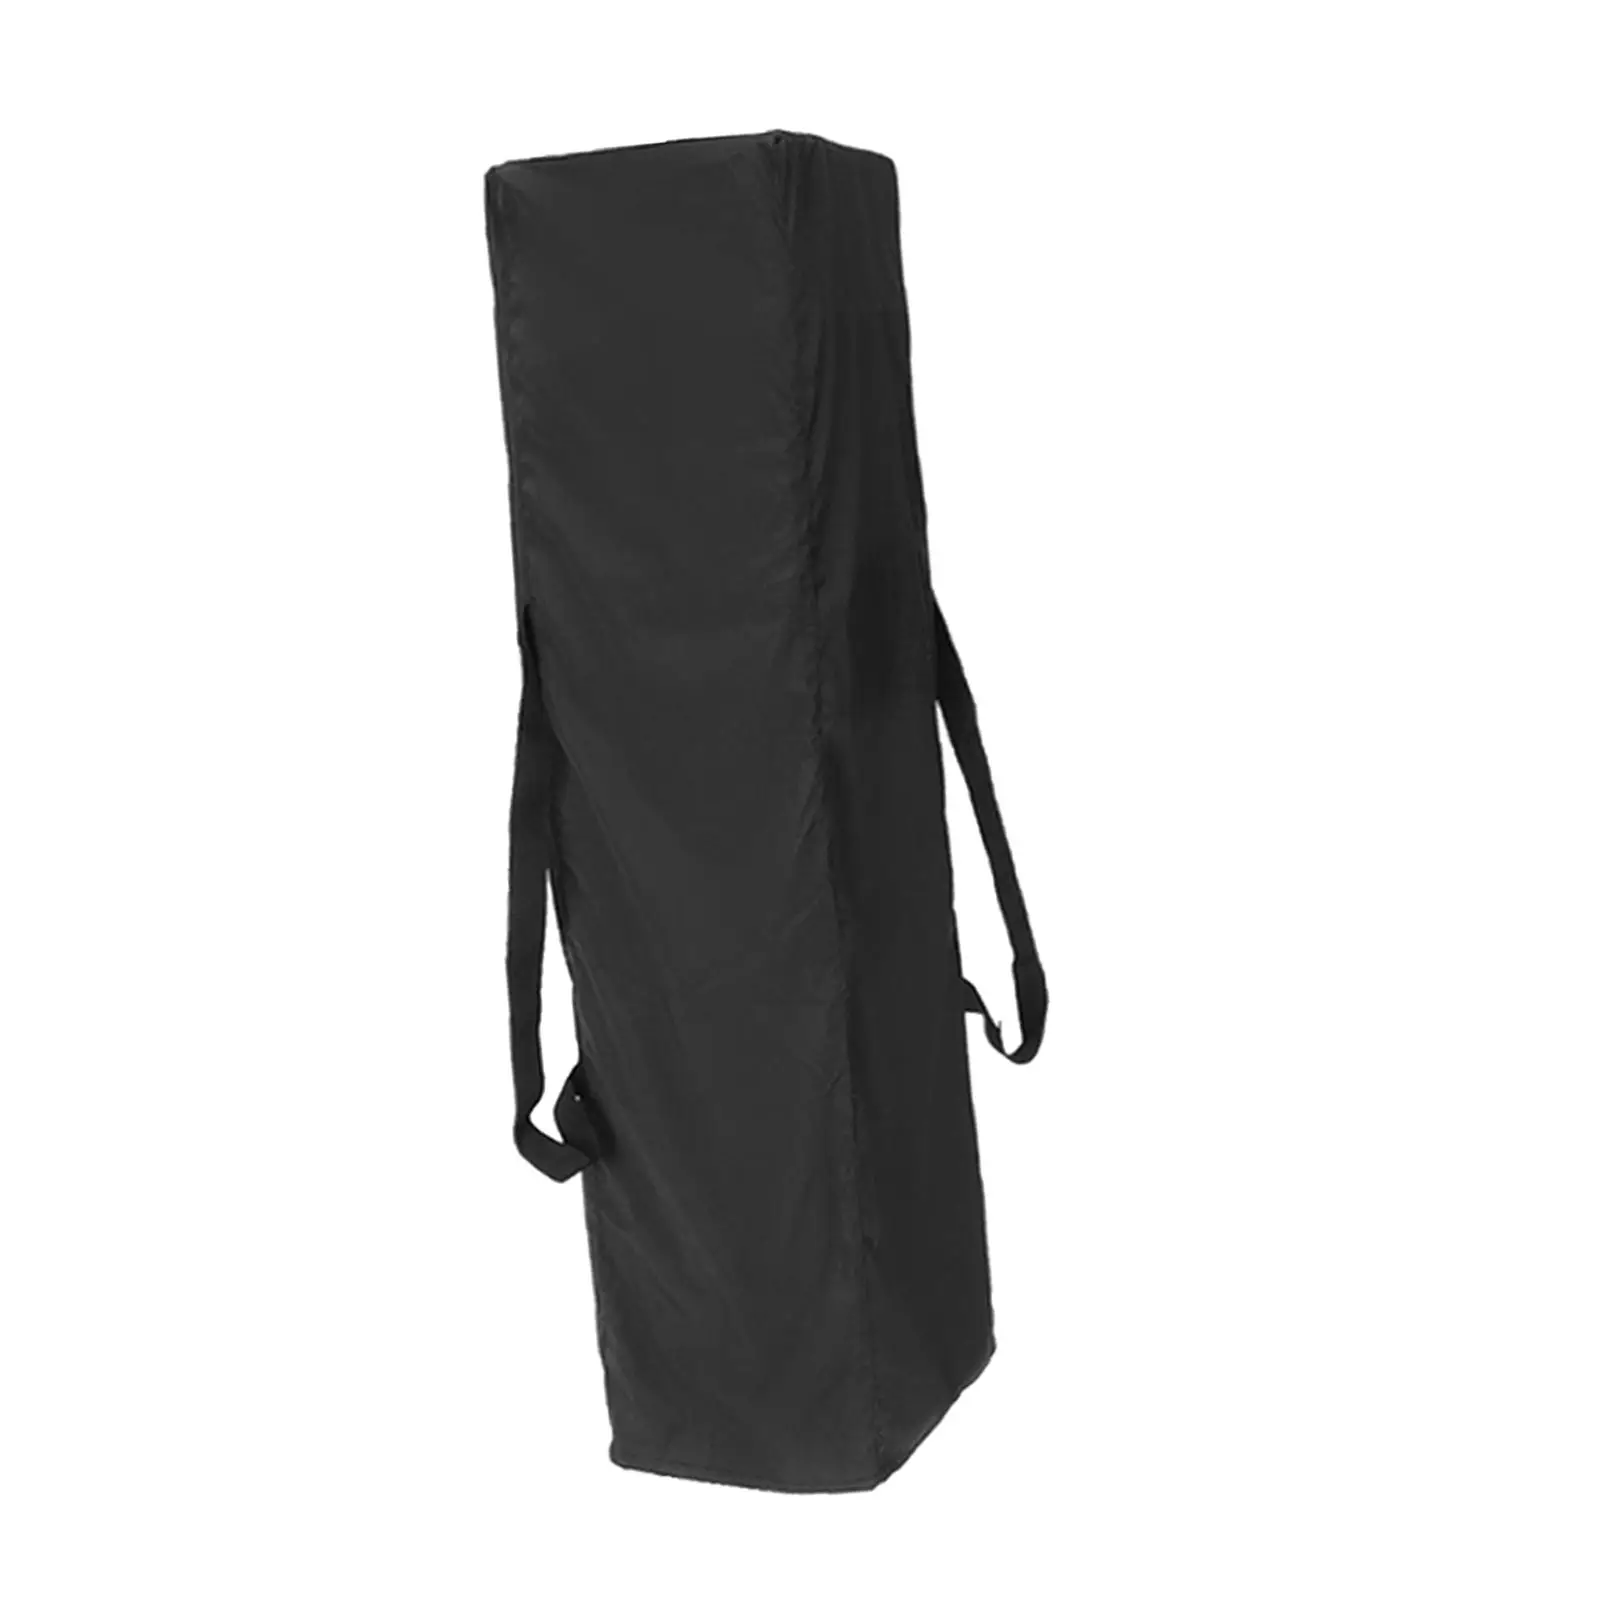 Portable Oxford Cloth Carrying Tent Bag Tent Storage Accessories with Handle Tents Or Pergola Pole Storage Bag Bottom opening